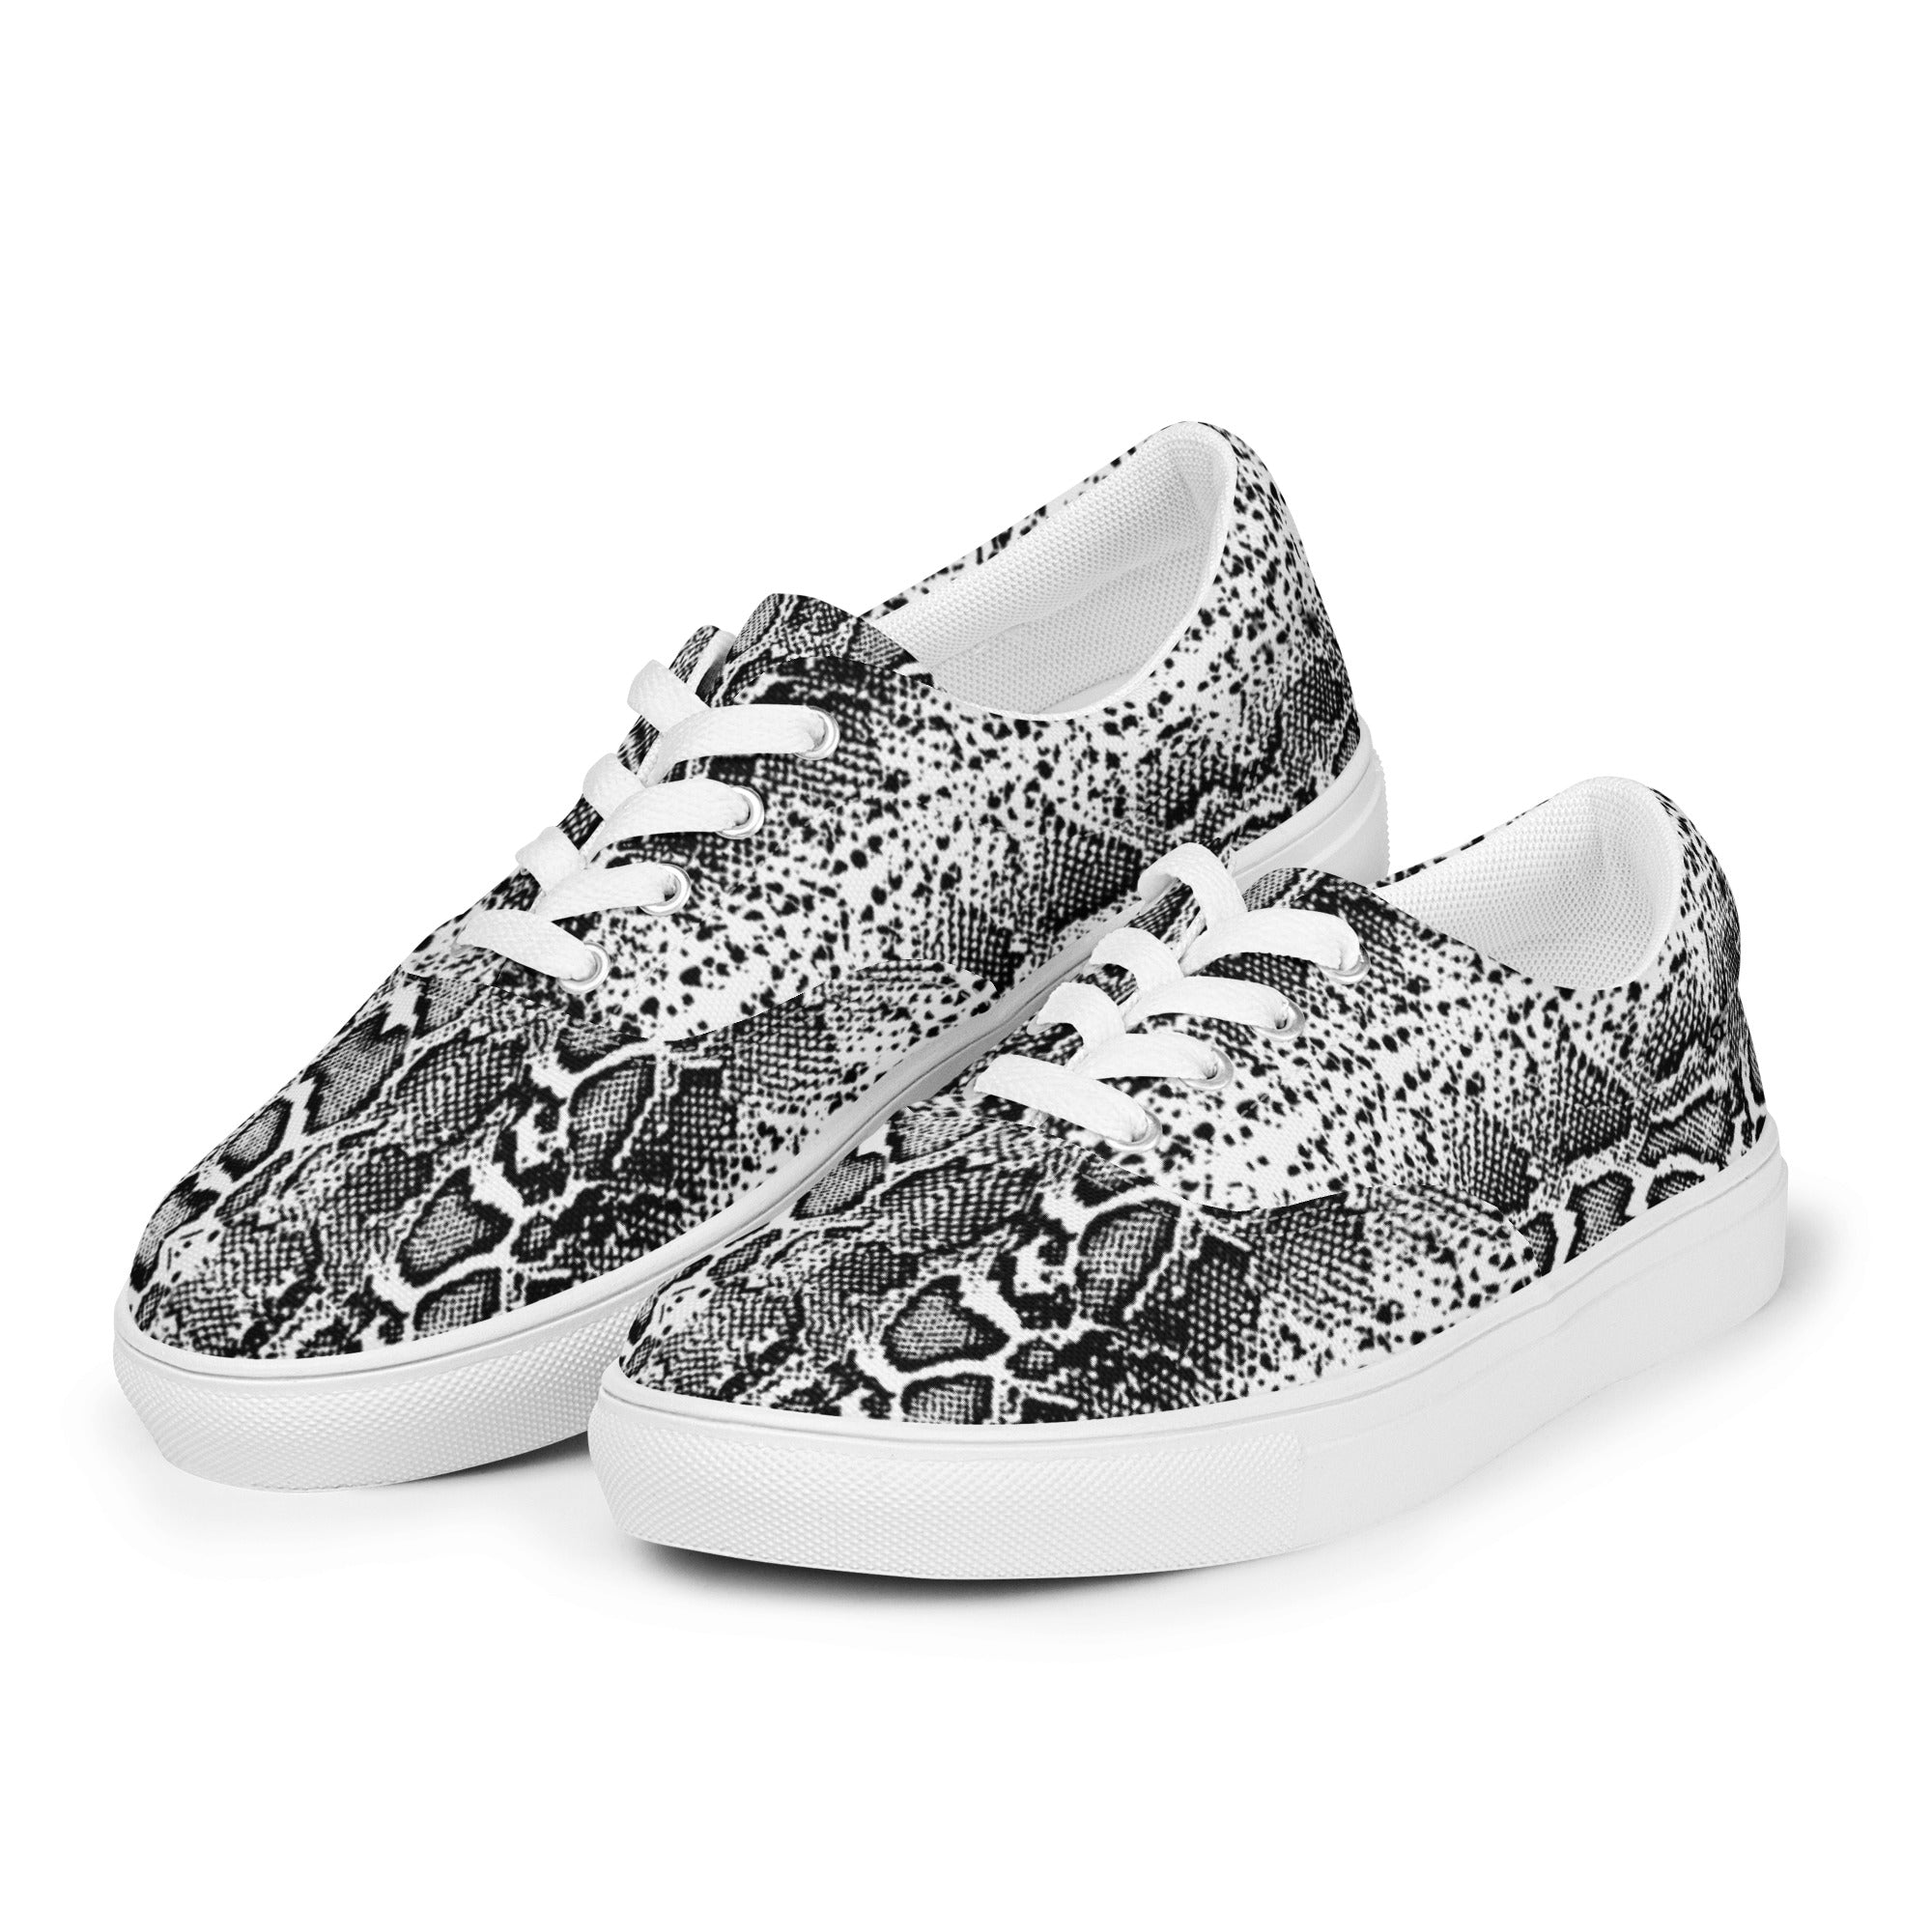 Black and White Python Skin Print Men’s Lace-Up Canvas Shoes